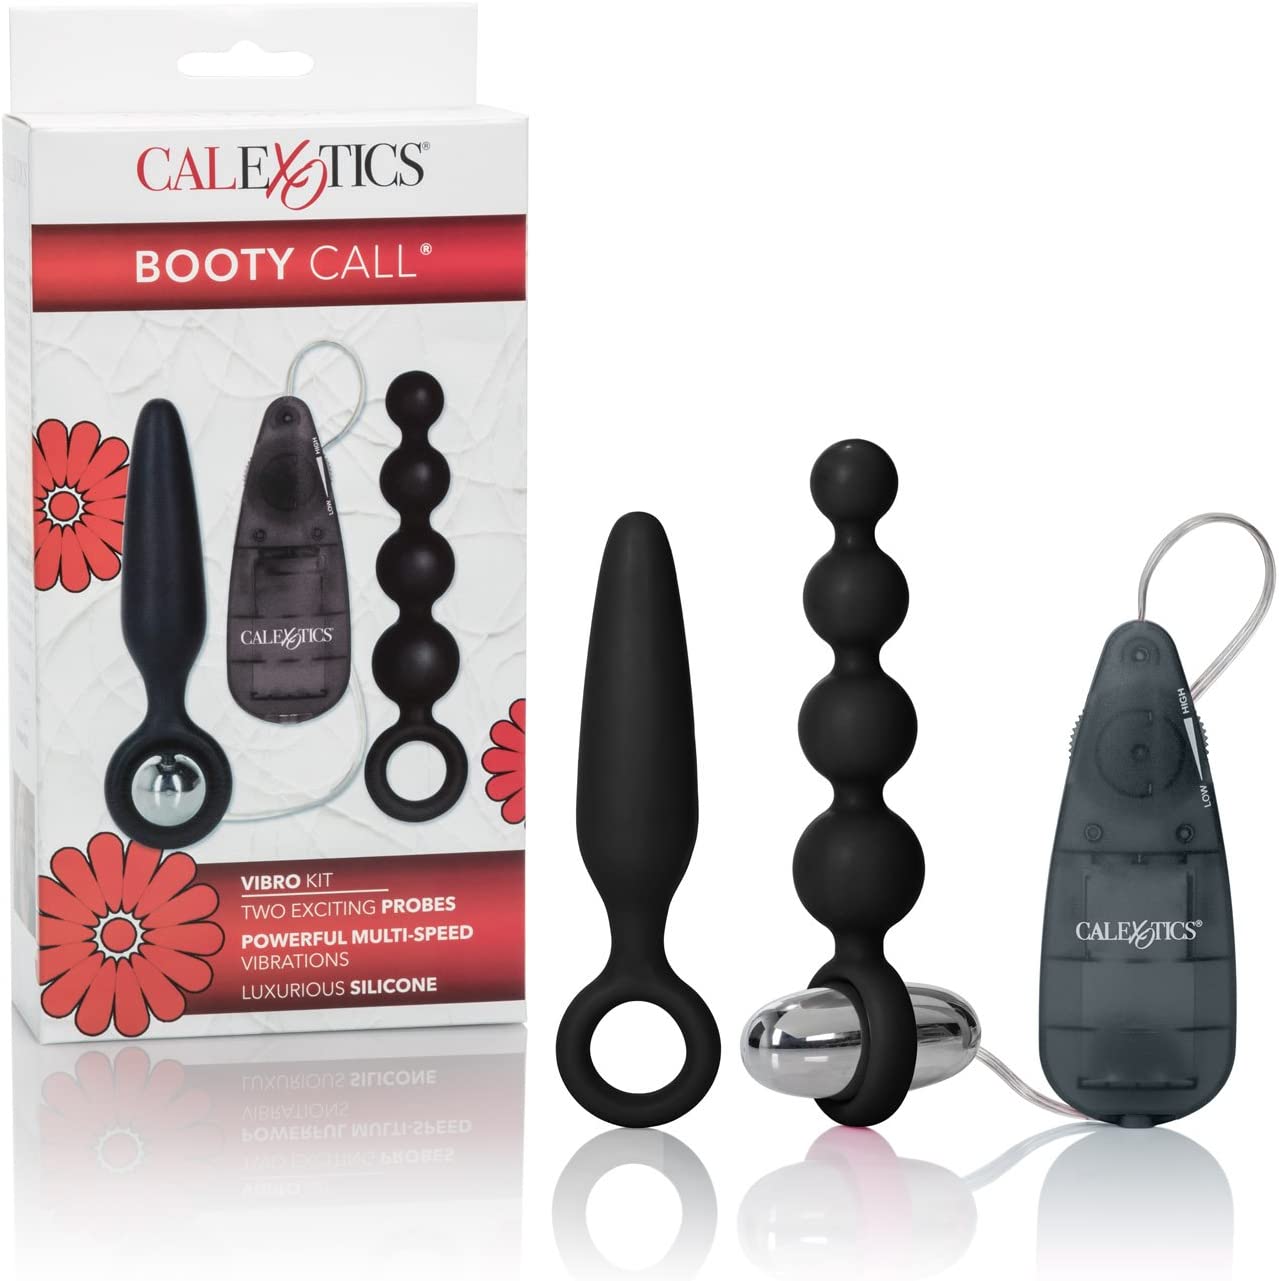 Booty Call Vibro Anale Kit